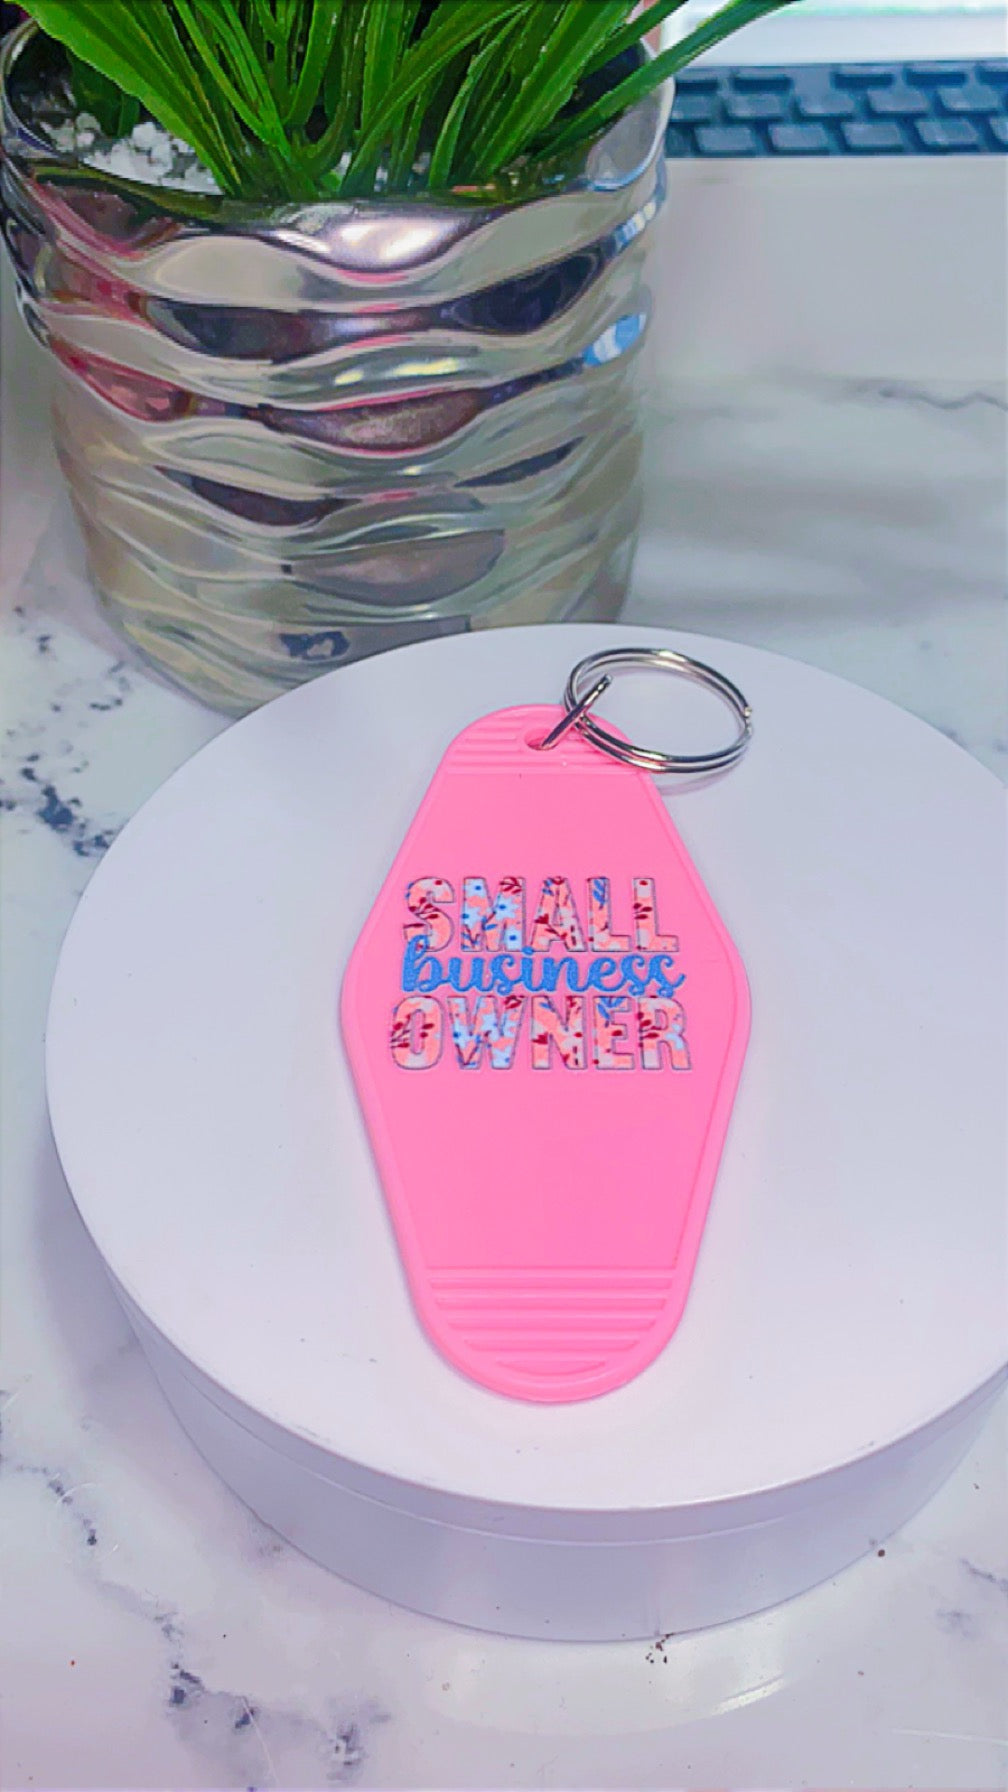 Small business owner keychain